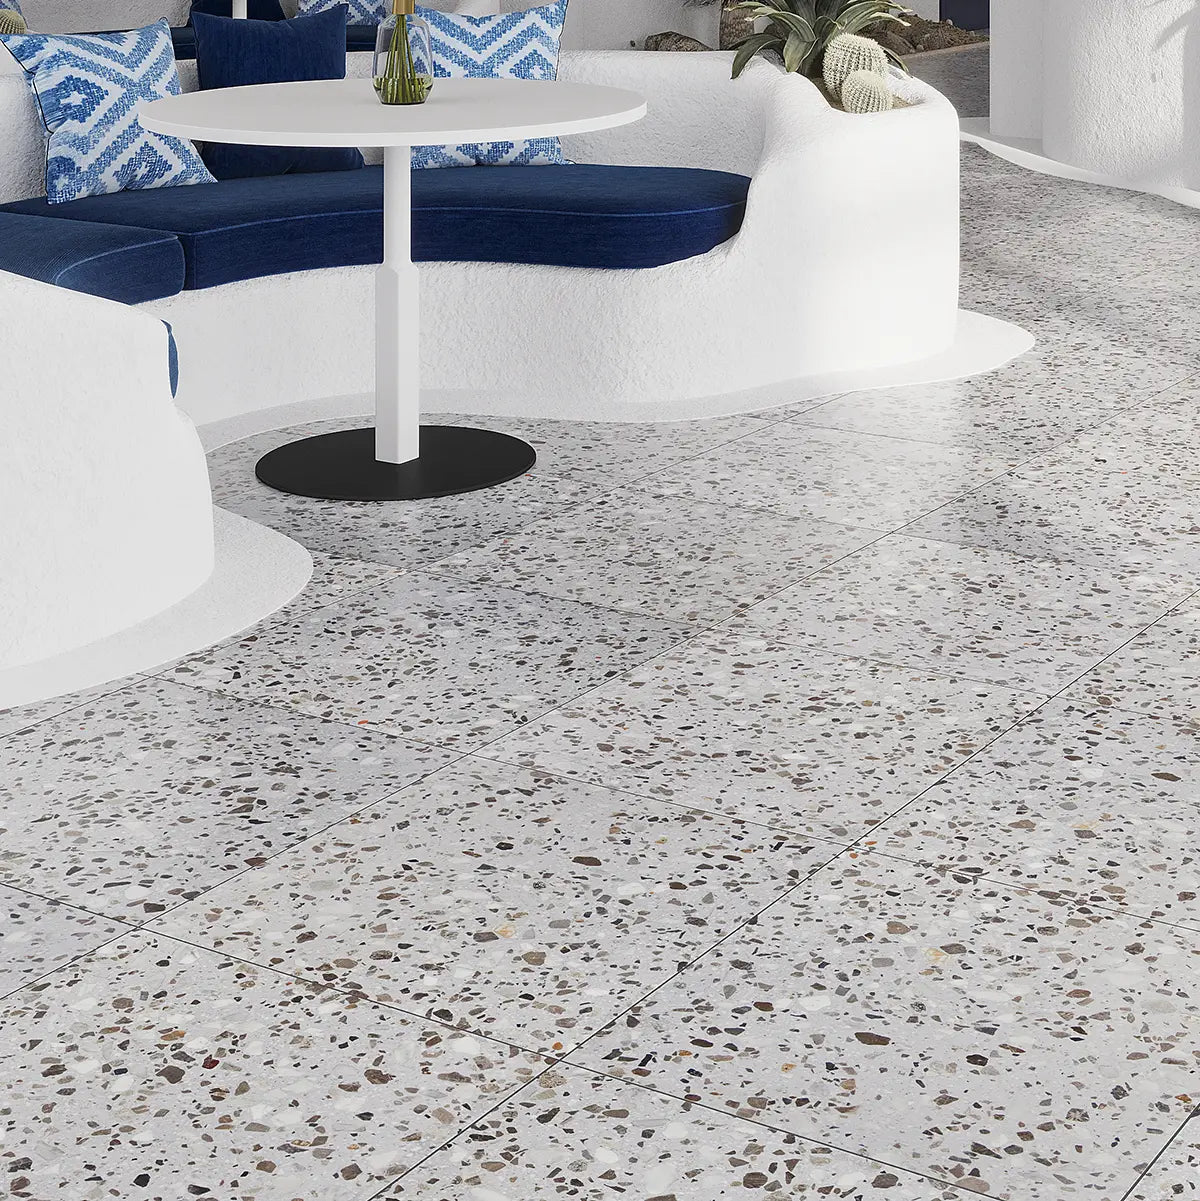 Gray and White Poured Terrazzo Concrete Tile for a Commercial Floor